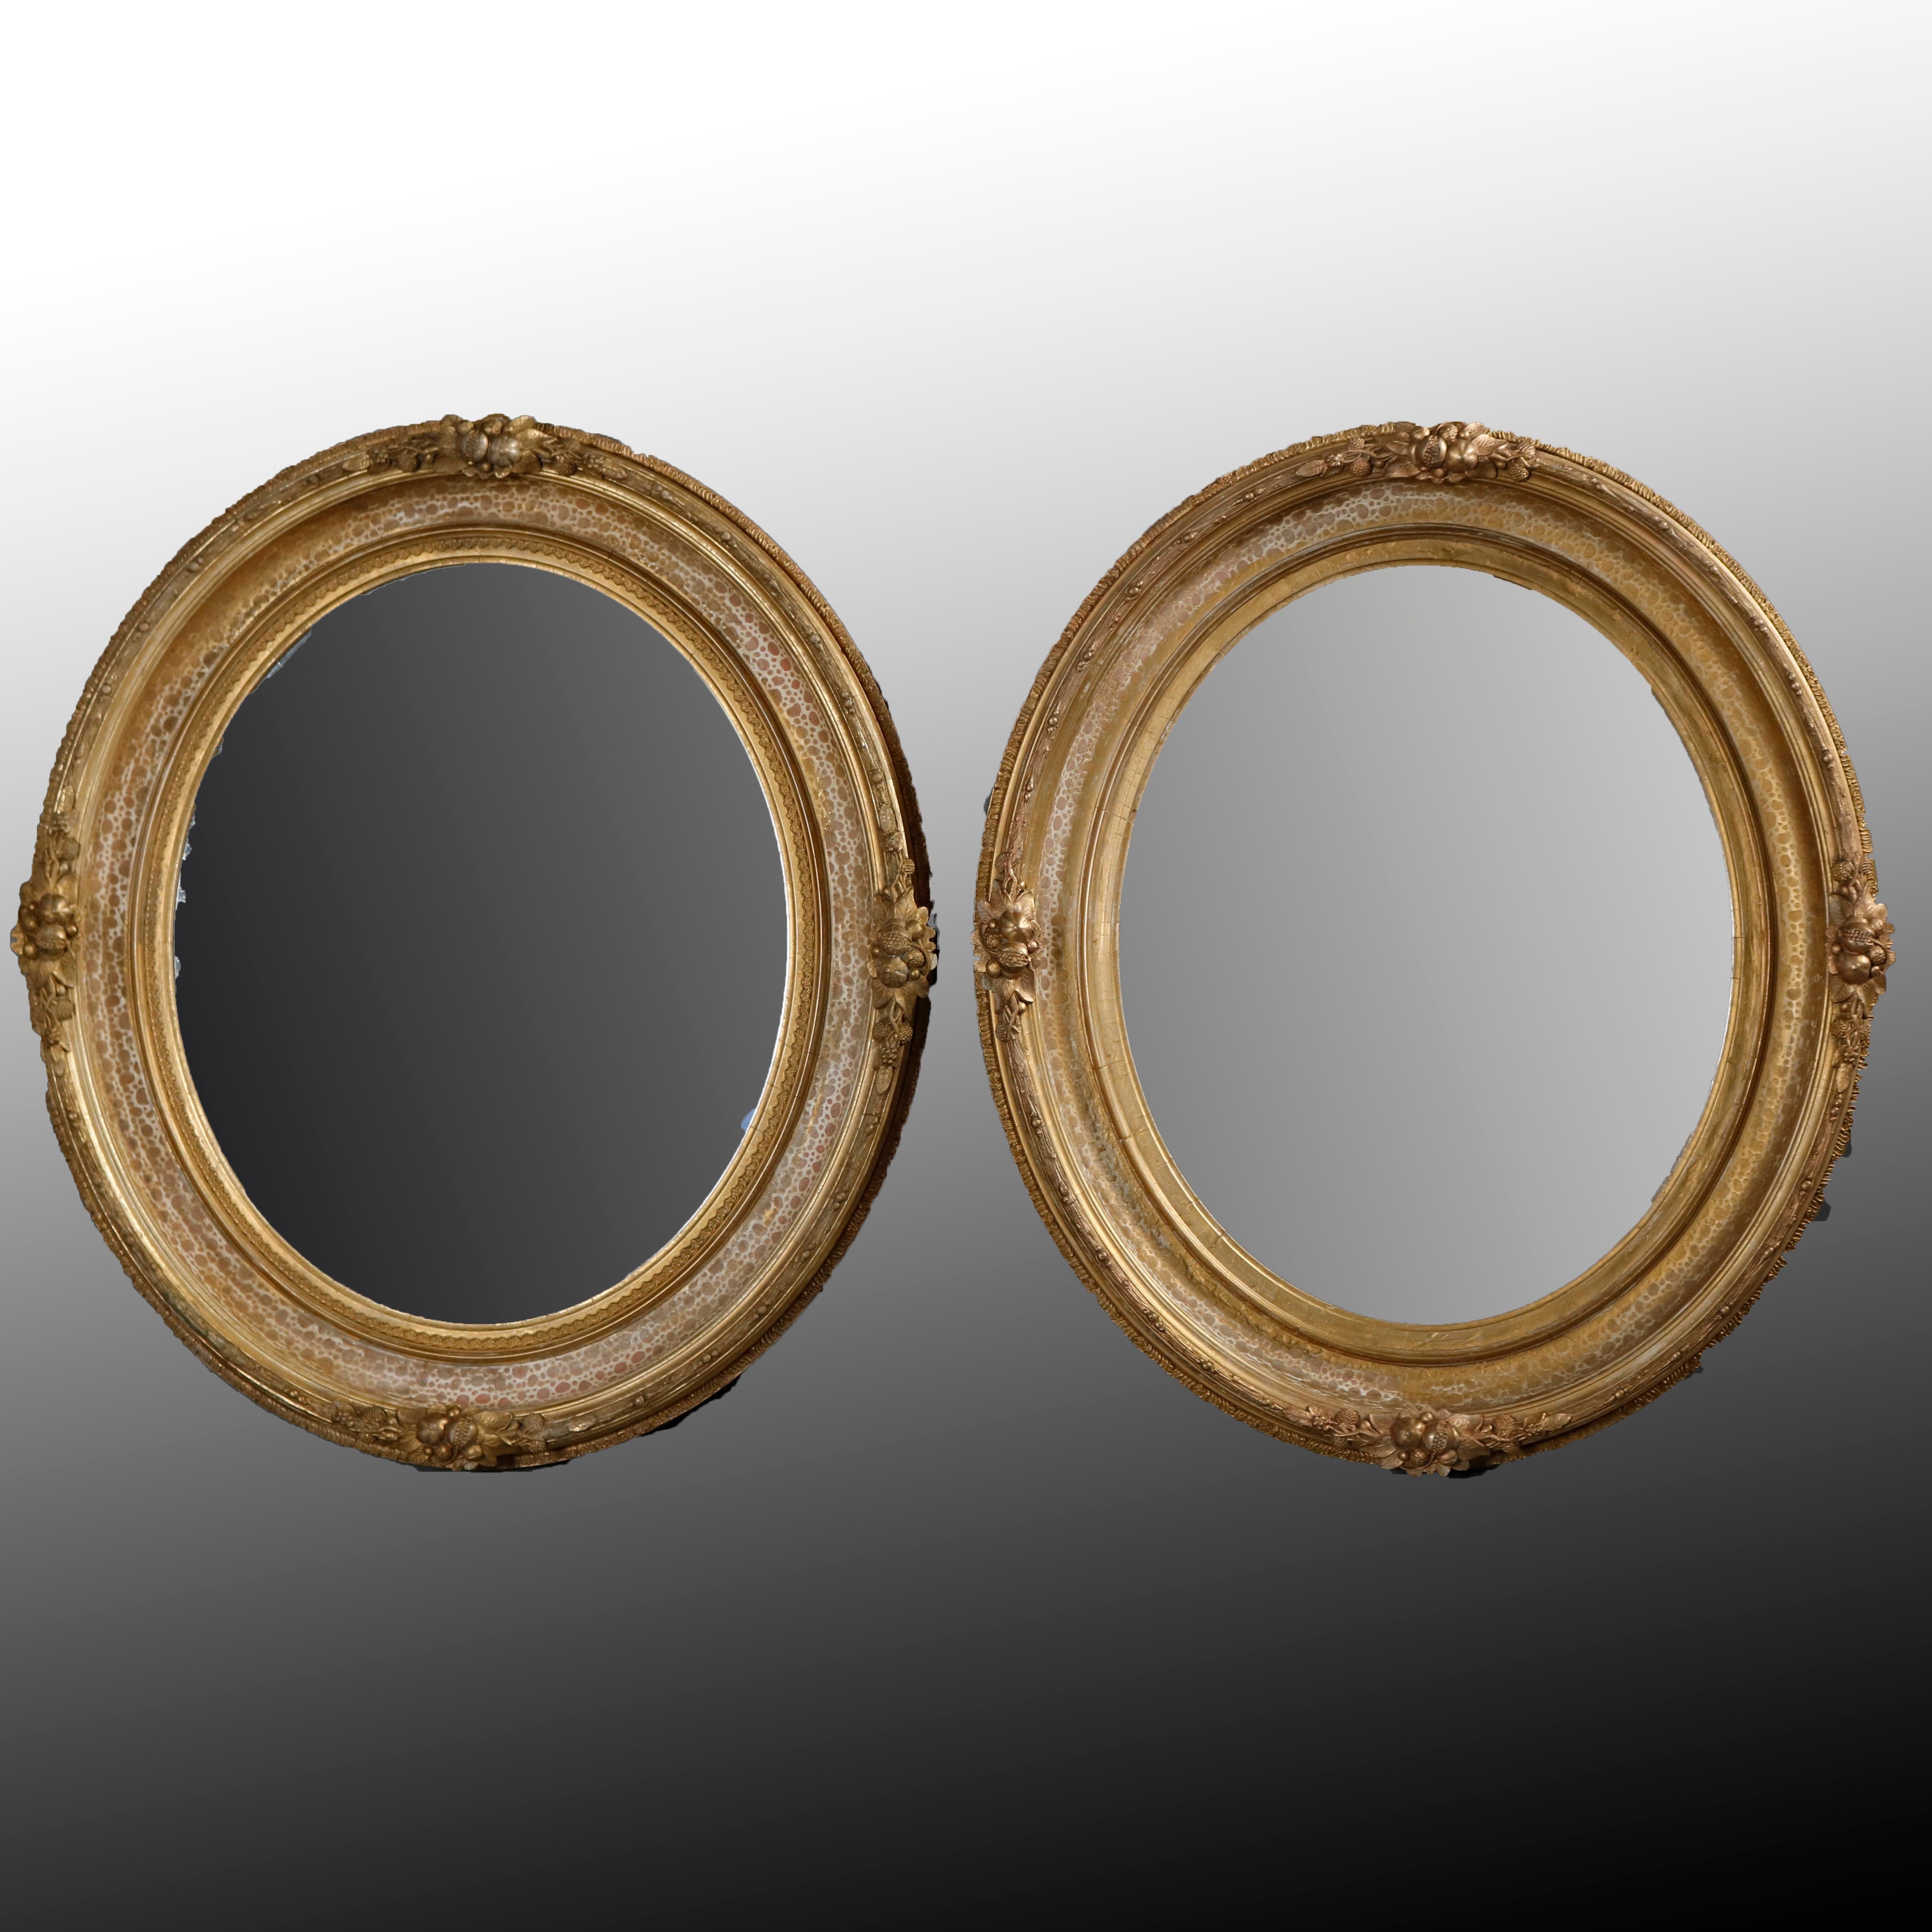 A pair of large and antique French Louis XIV wall mirrors offer giltwood frame in oval form having modeled finish and fruit and nut foliate elements, circa 1870

Measures: 29.75